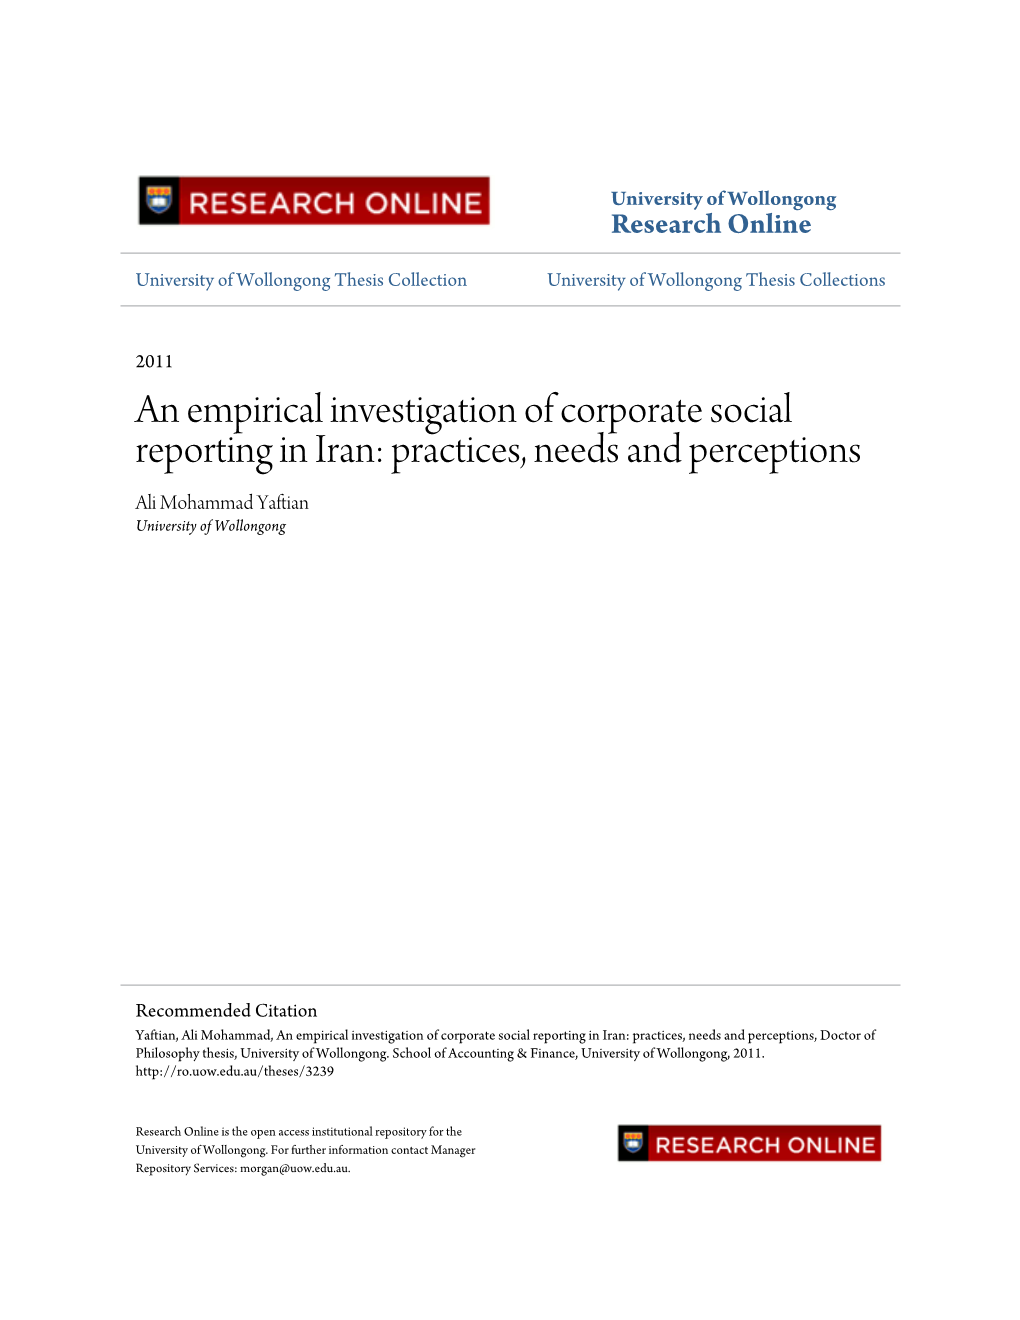 An Empirical Investigation of Corporate Social Reporting in Iran: Practices, Needs and Perceptions Ali Mohammad Yaftian University of Wollongong